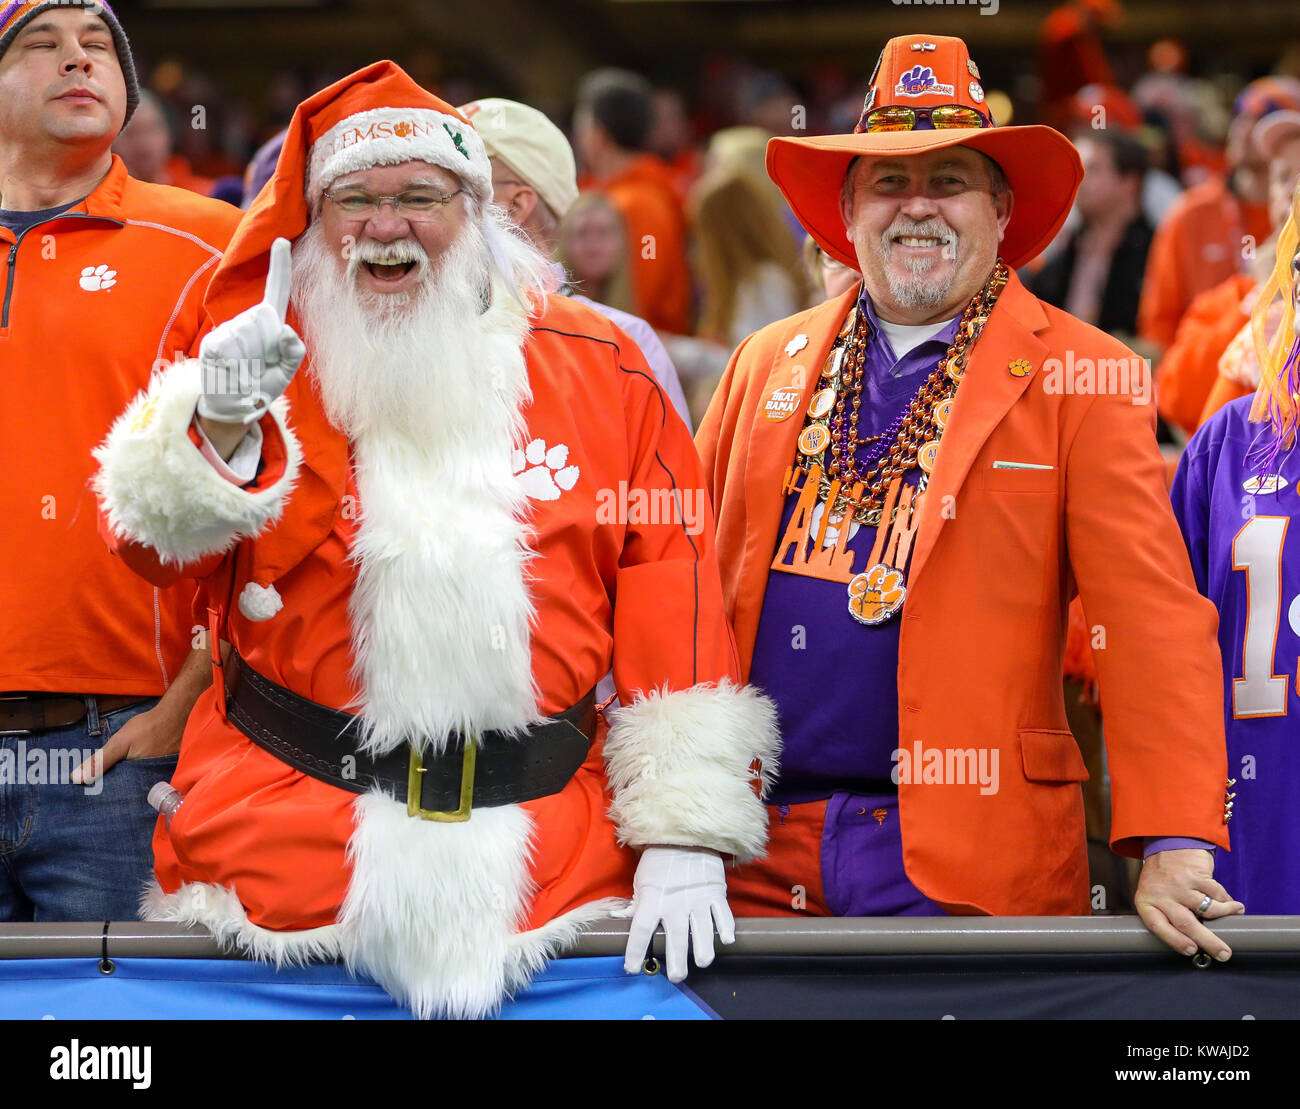 New Orleans, LA, USA. 1st Jan, 2018. A Clemson fan dressed as Santa Clause in the stand prior to the Allstate Sugar Bowl football game between the Clemson Tigers and the Alabama Crimson Tide at the Mercedes-Benz Supedome in New Orleans, LA. Kyle Okita/CSM/Alamy Live News Stock Photo